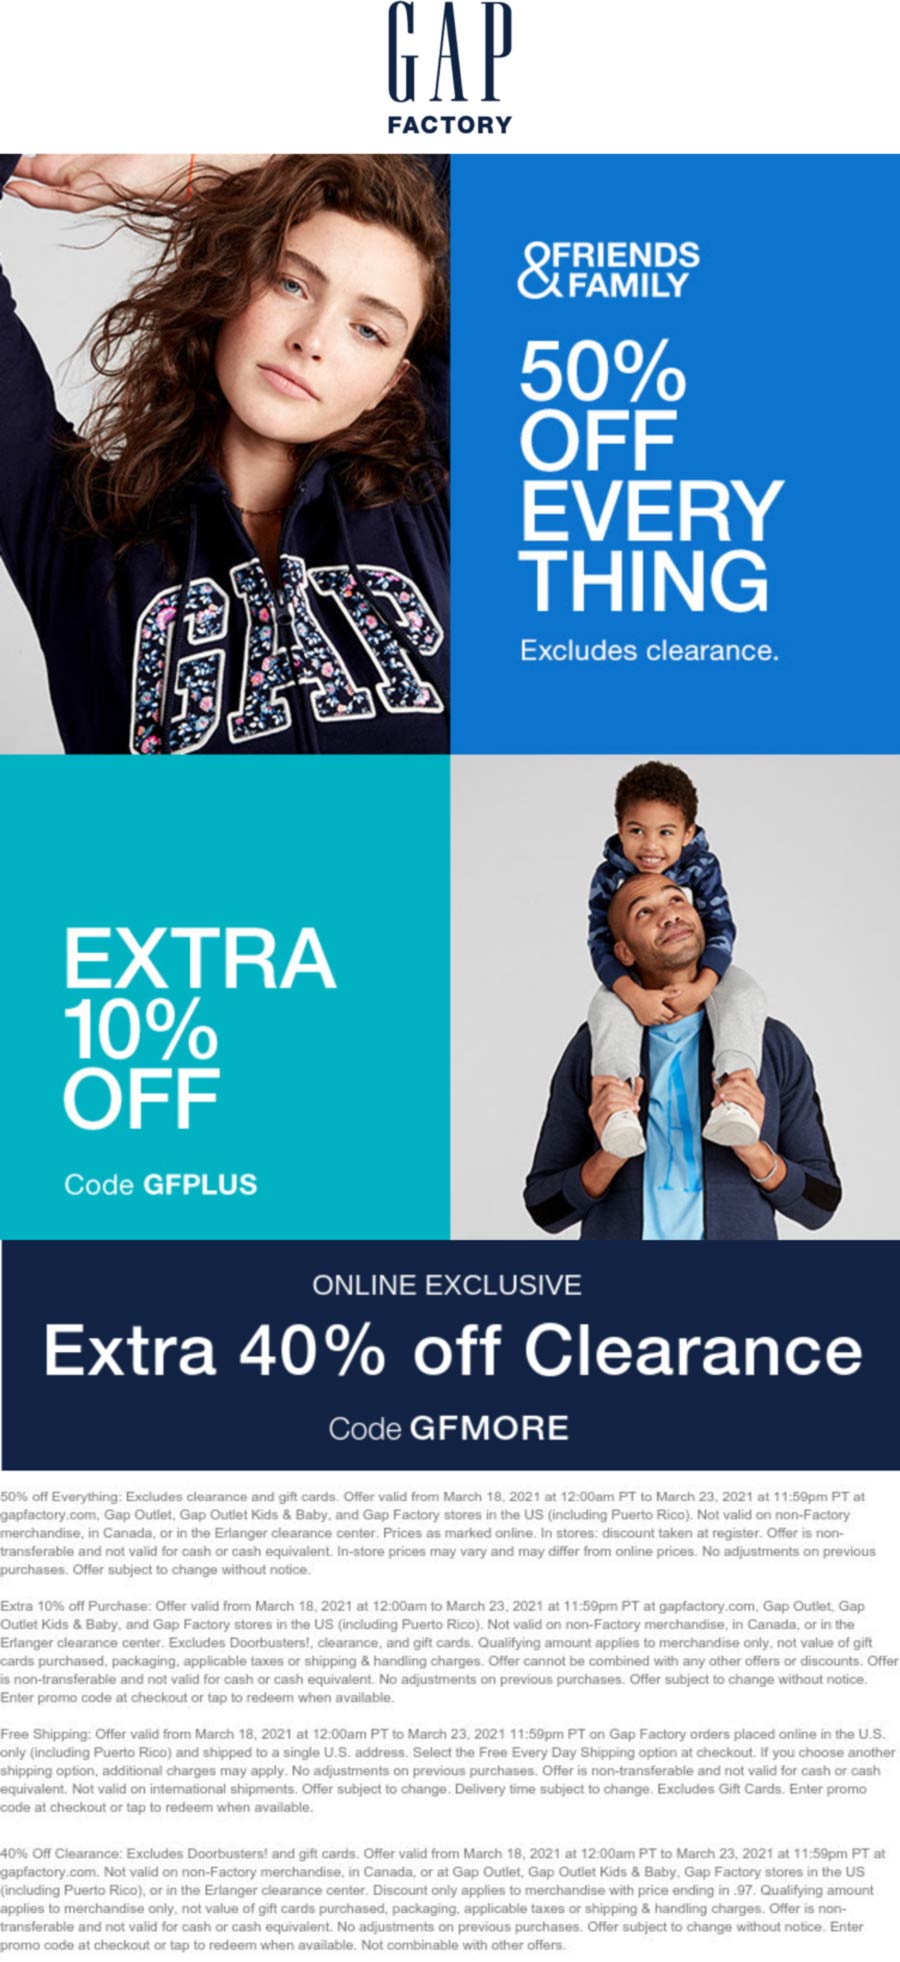 Gap Factory stores Coupon  60% off everything at Gap Factory, or online via promo code GFPLUS #gapfactory 